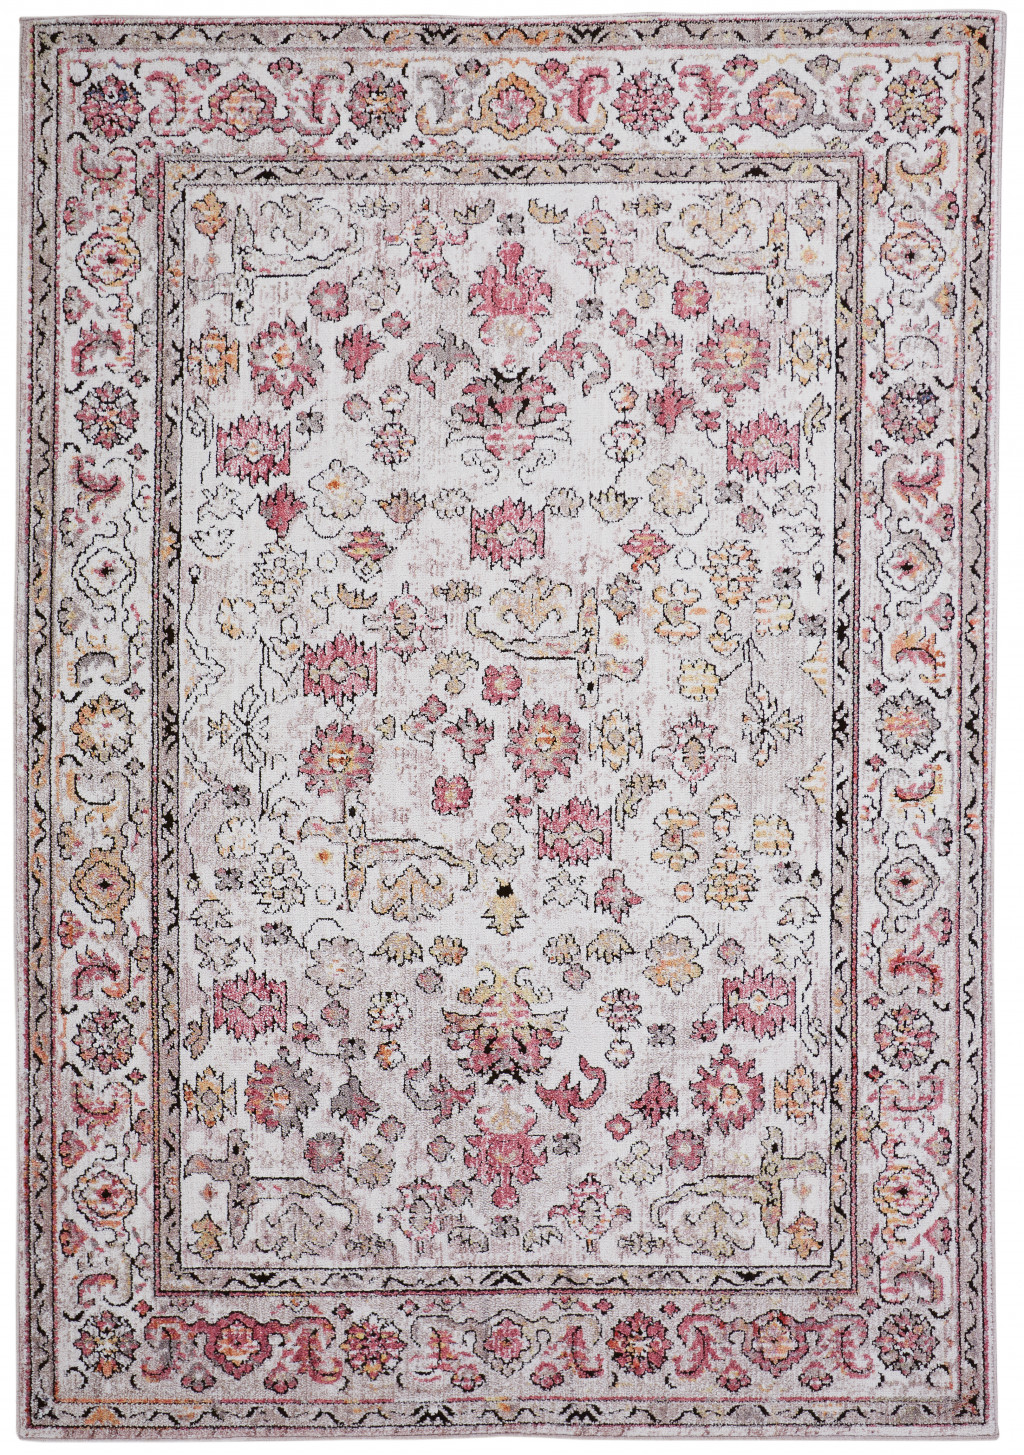 10' X 13' Ivory Pink And Gray Floral Stain Resistant Area Rug-512345-1